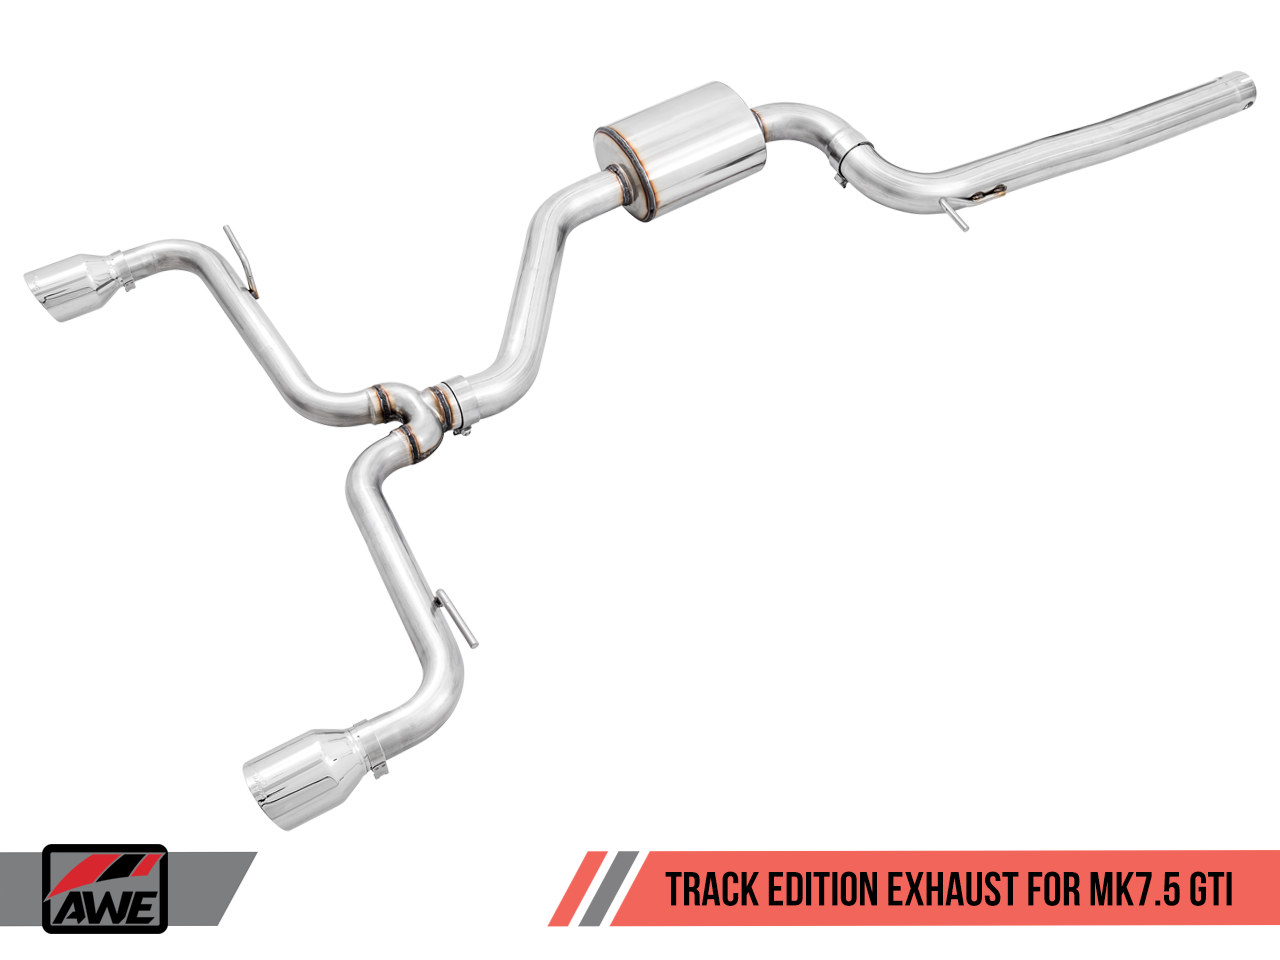 AWE Touring Edition Exhaust for VW MK7.5 GTI - Motorsports LA